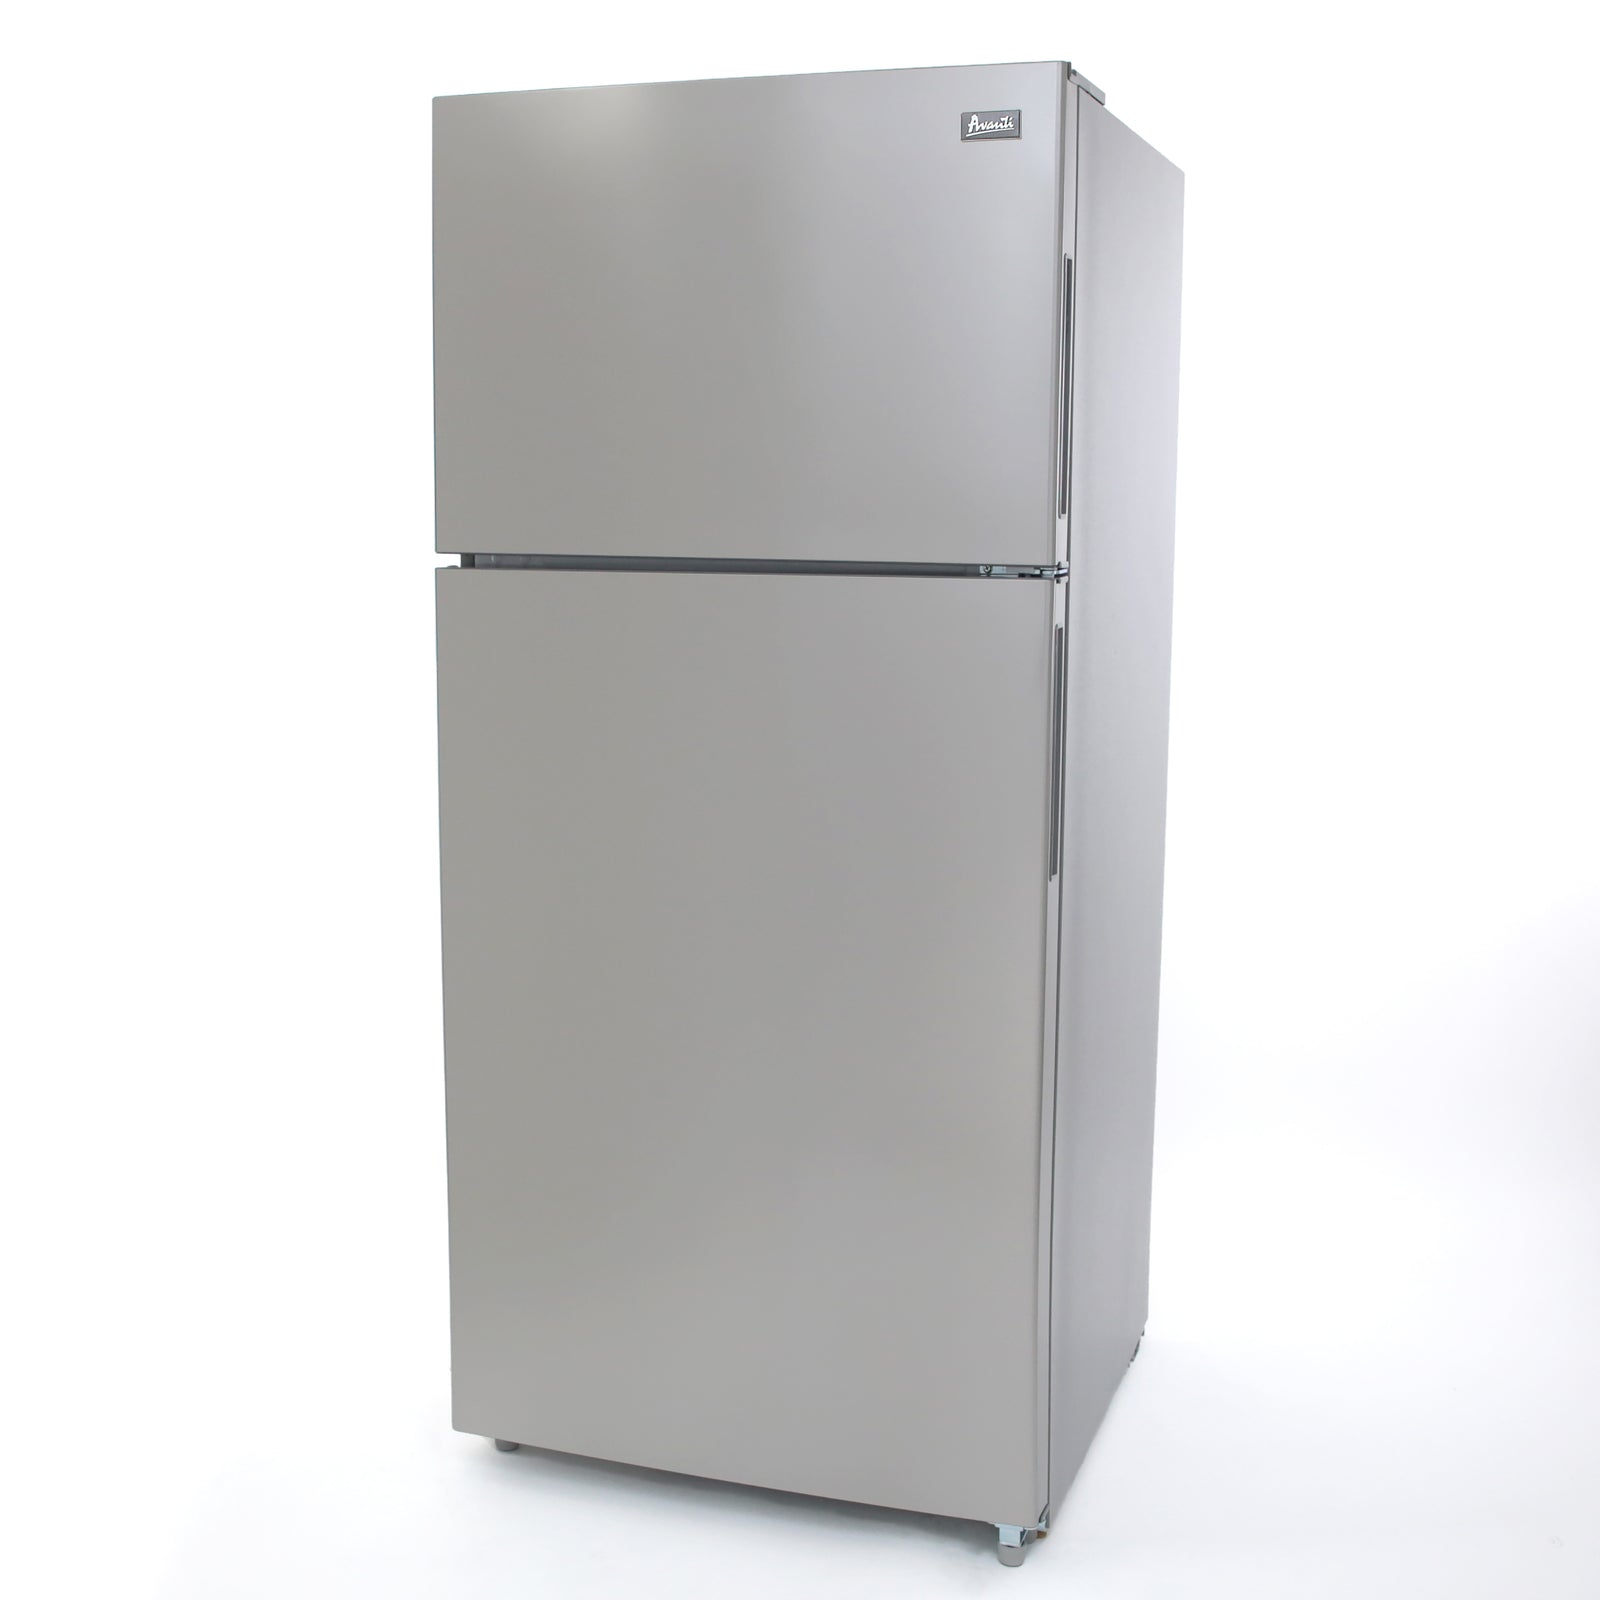 Avanti Frost-Free Apartment Size Refrigerator, 18.0 cu. ft. - Stainless Steel / 18 cu. ft.